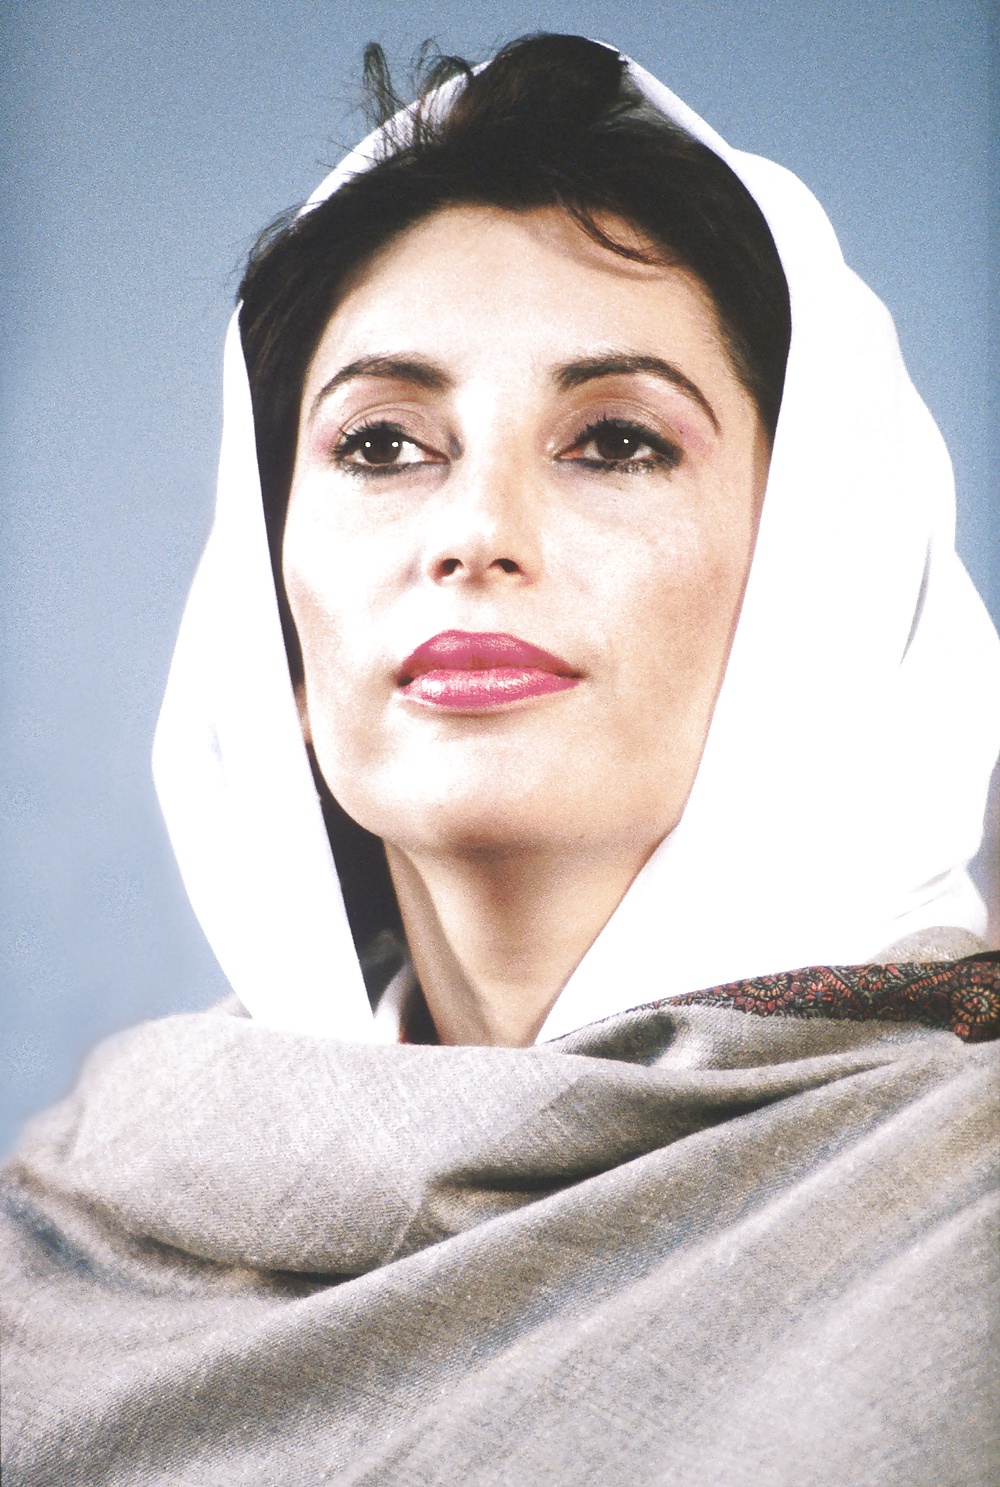 Let's Jerk Off Over ... Benazir Bhutto (Pakistani PM) #35645080